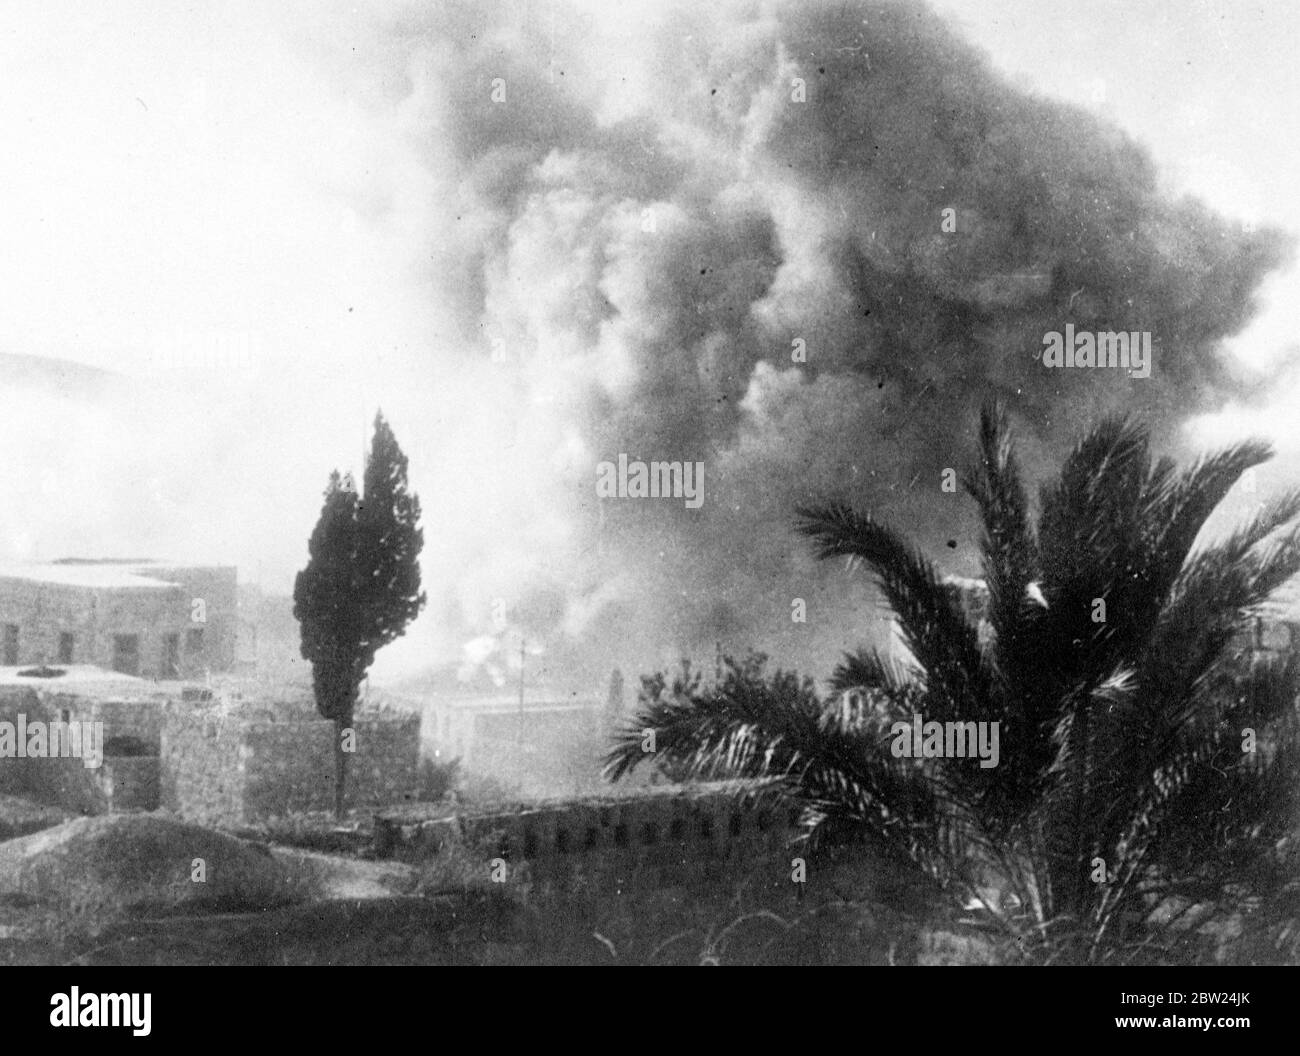 British troops, blow up 100 Arab houses in Palestine town. Royal Engineers dynamited over 100 Arab houses in Jenin, Palestine, following the murder by Arabs and Assistant District Commissioner Moffett of Jenin. The houses were destroyed, partly as a punitive measure against the inhabitants of the town having harboured Arab rebels and partly for reasons of security, houses in Jenin was built so close to one another that police and military patrolling was impossible. Photo shows, the pall of smoke and dust as the houses were blown up. 5 September 1938 Stock Photo